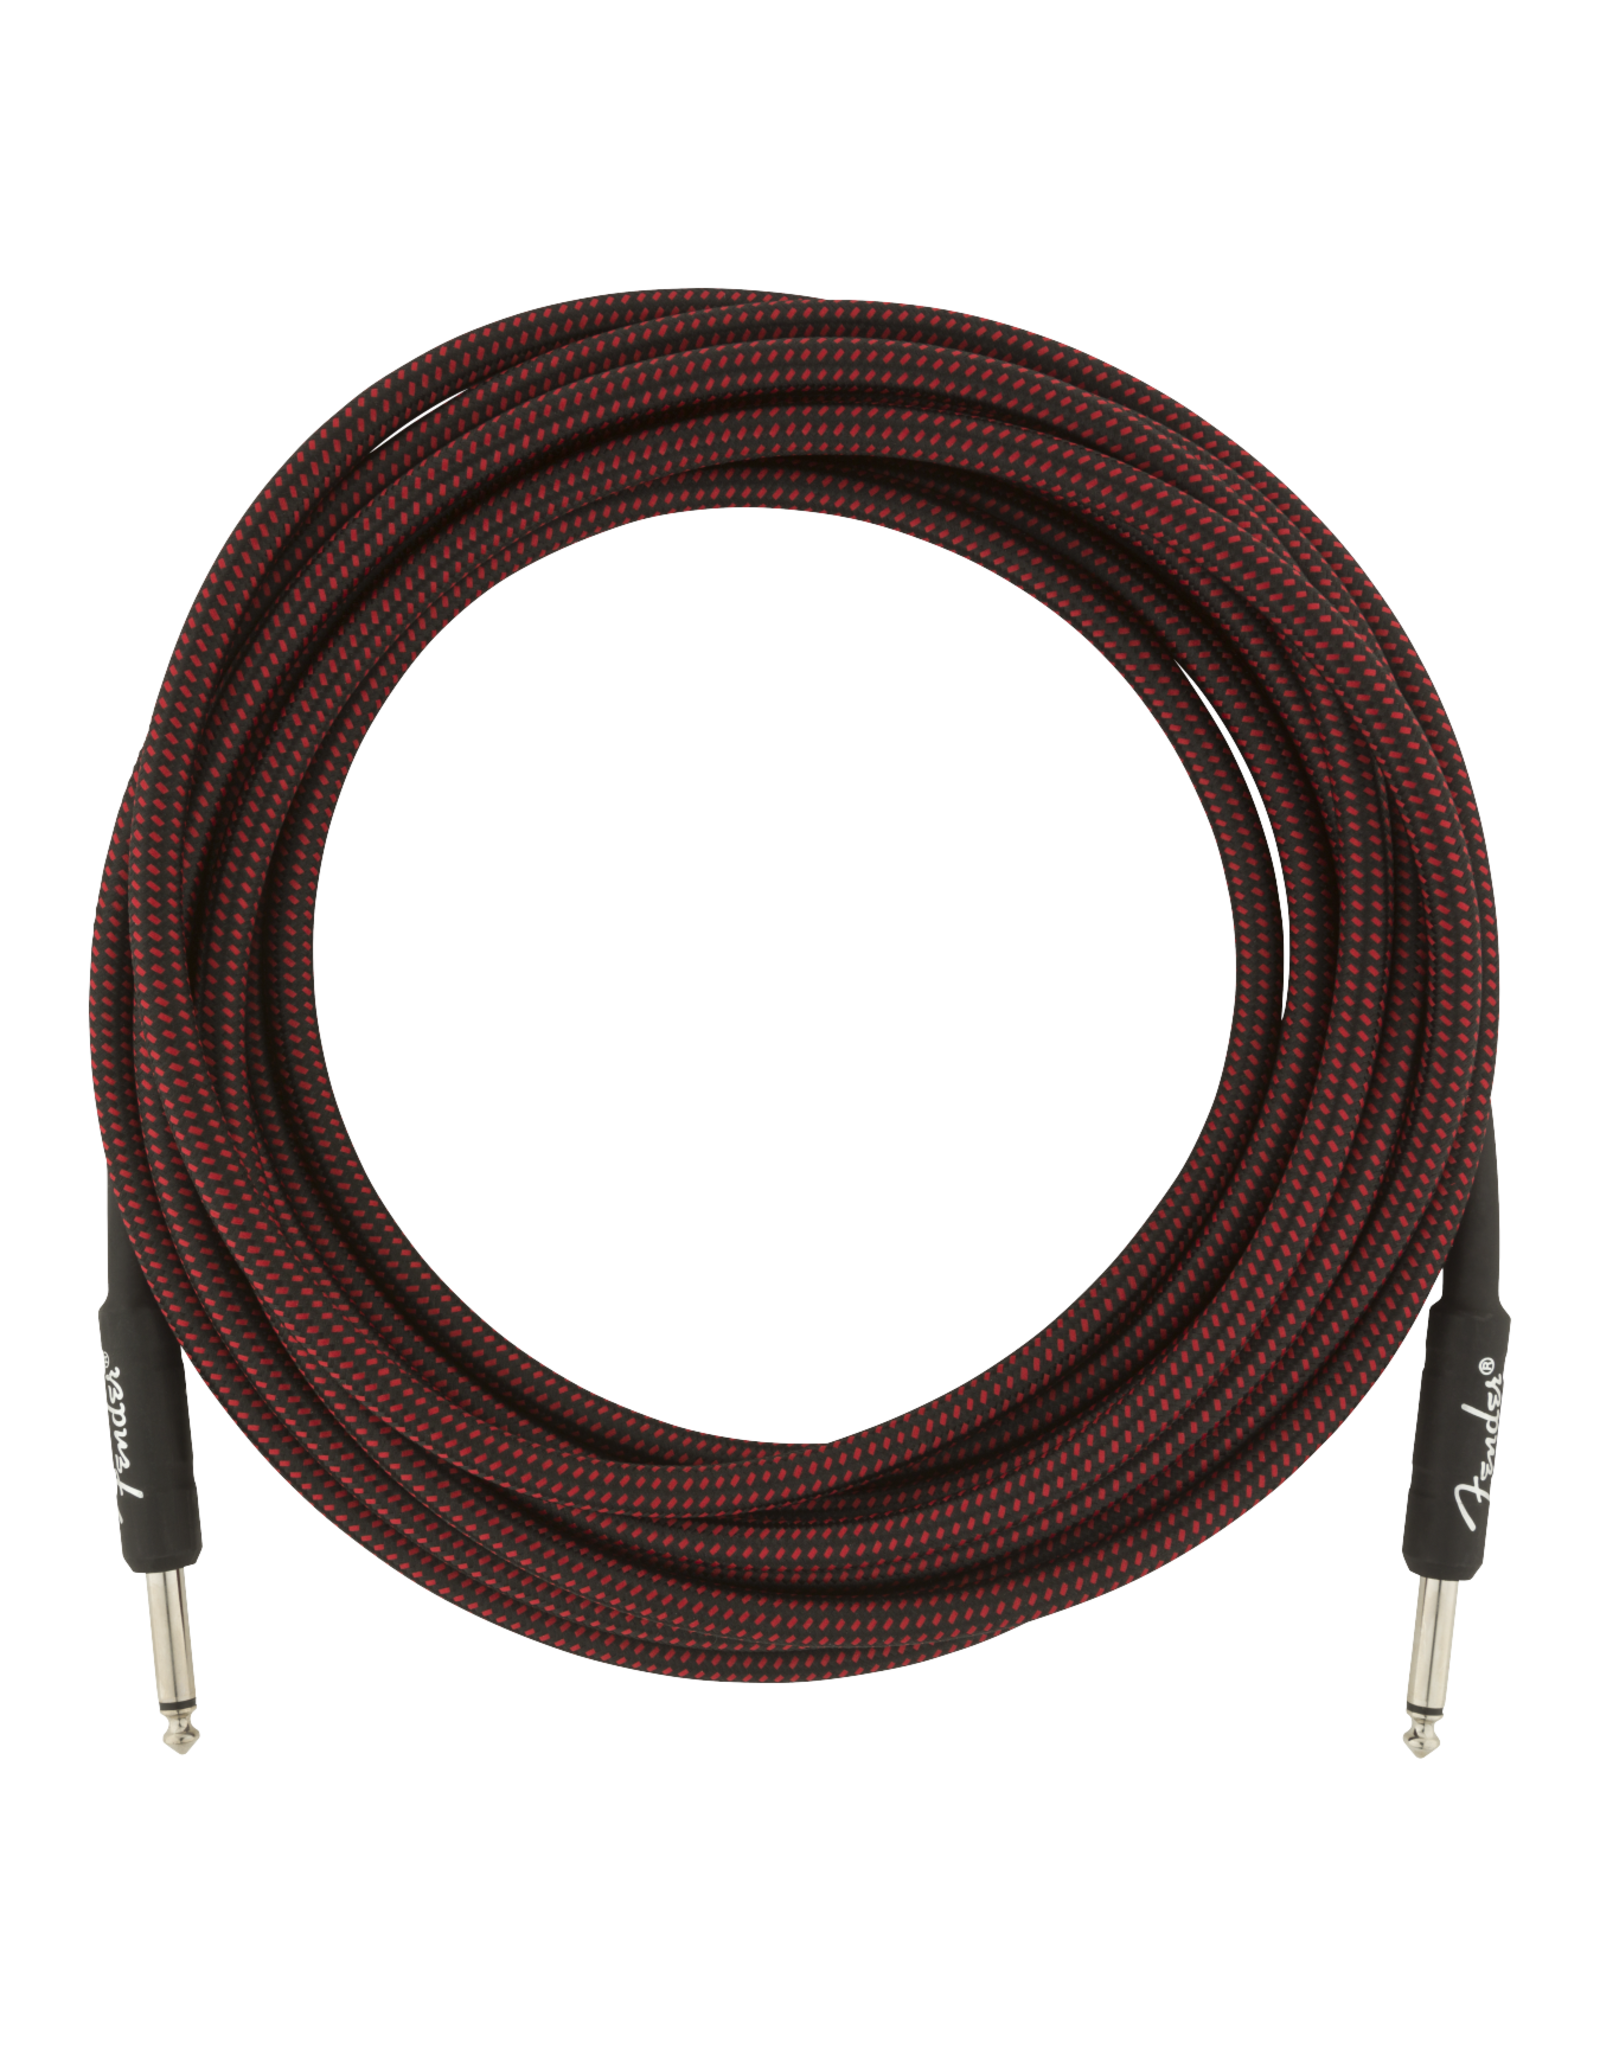 Fender Fender Pro Series Instrument Cable, 18.6', Red Tweed